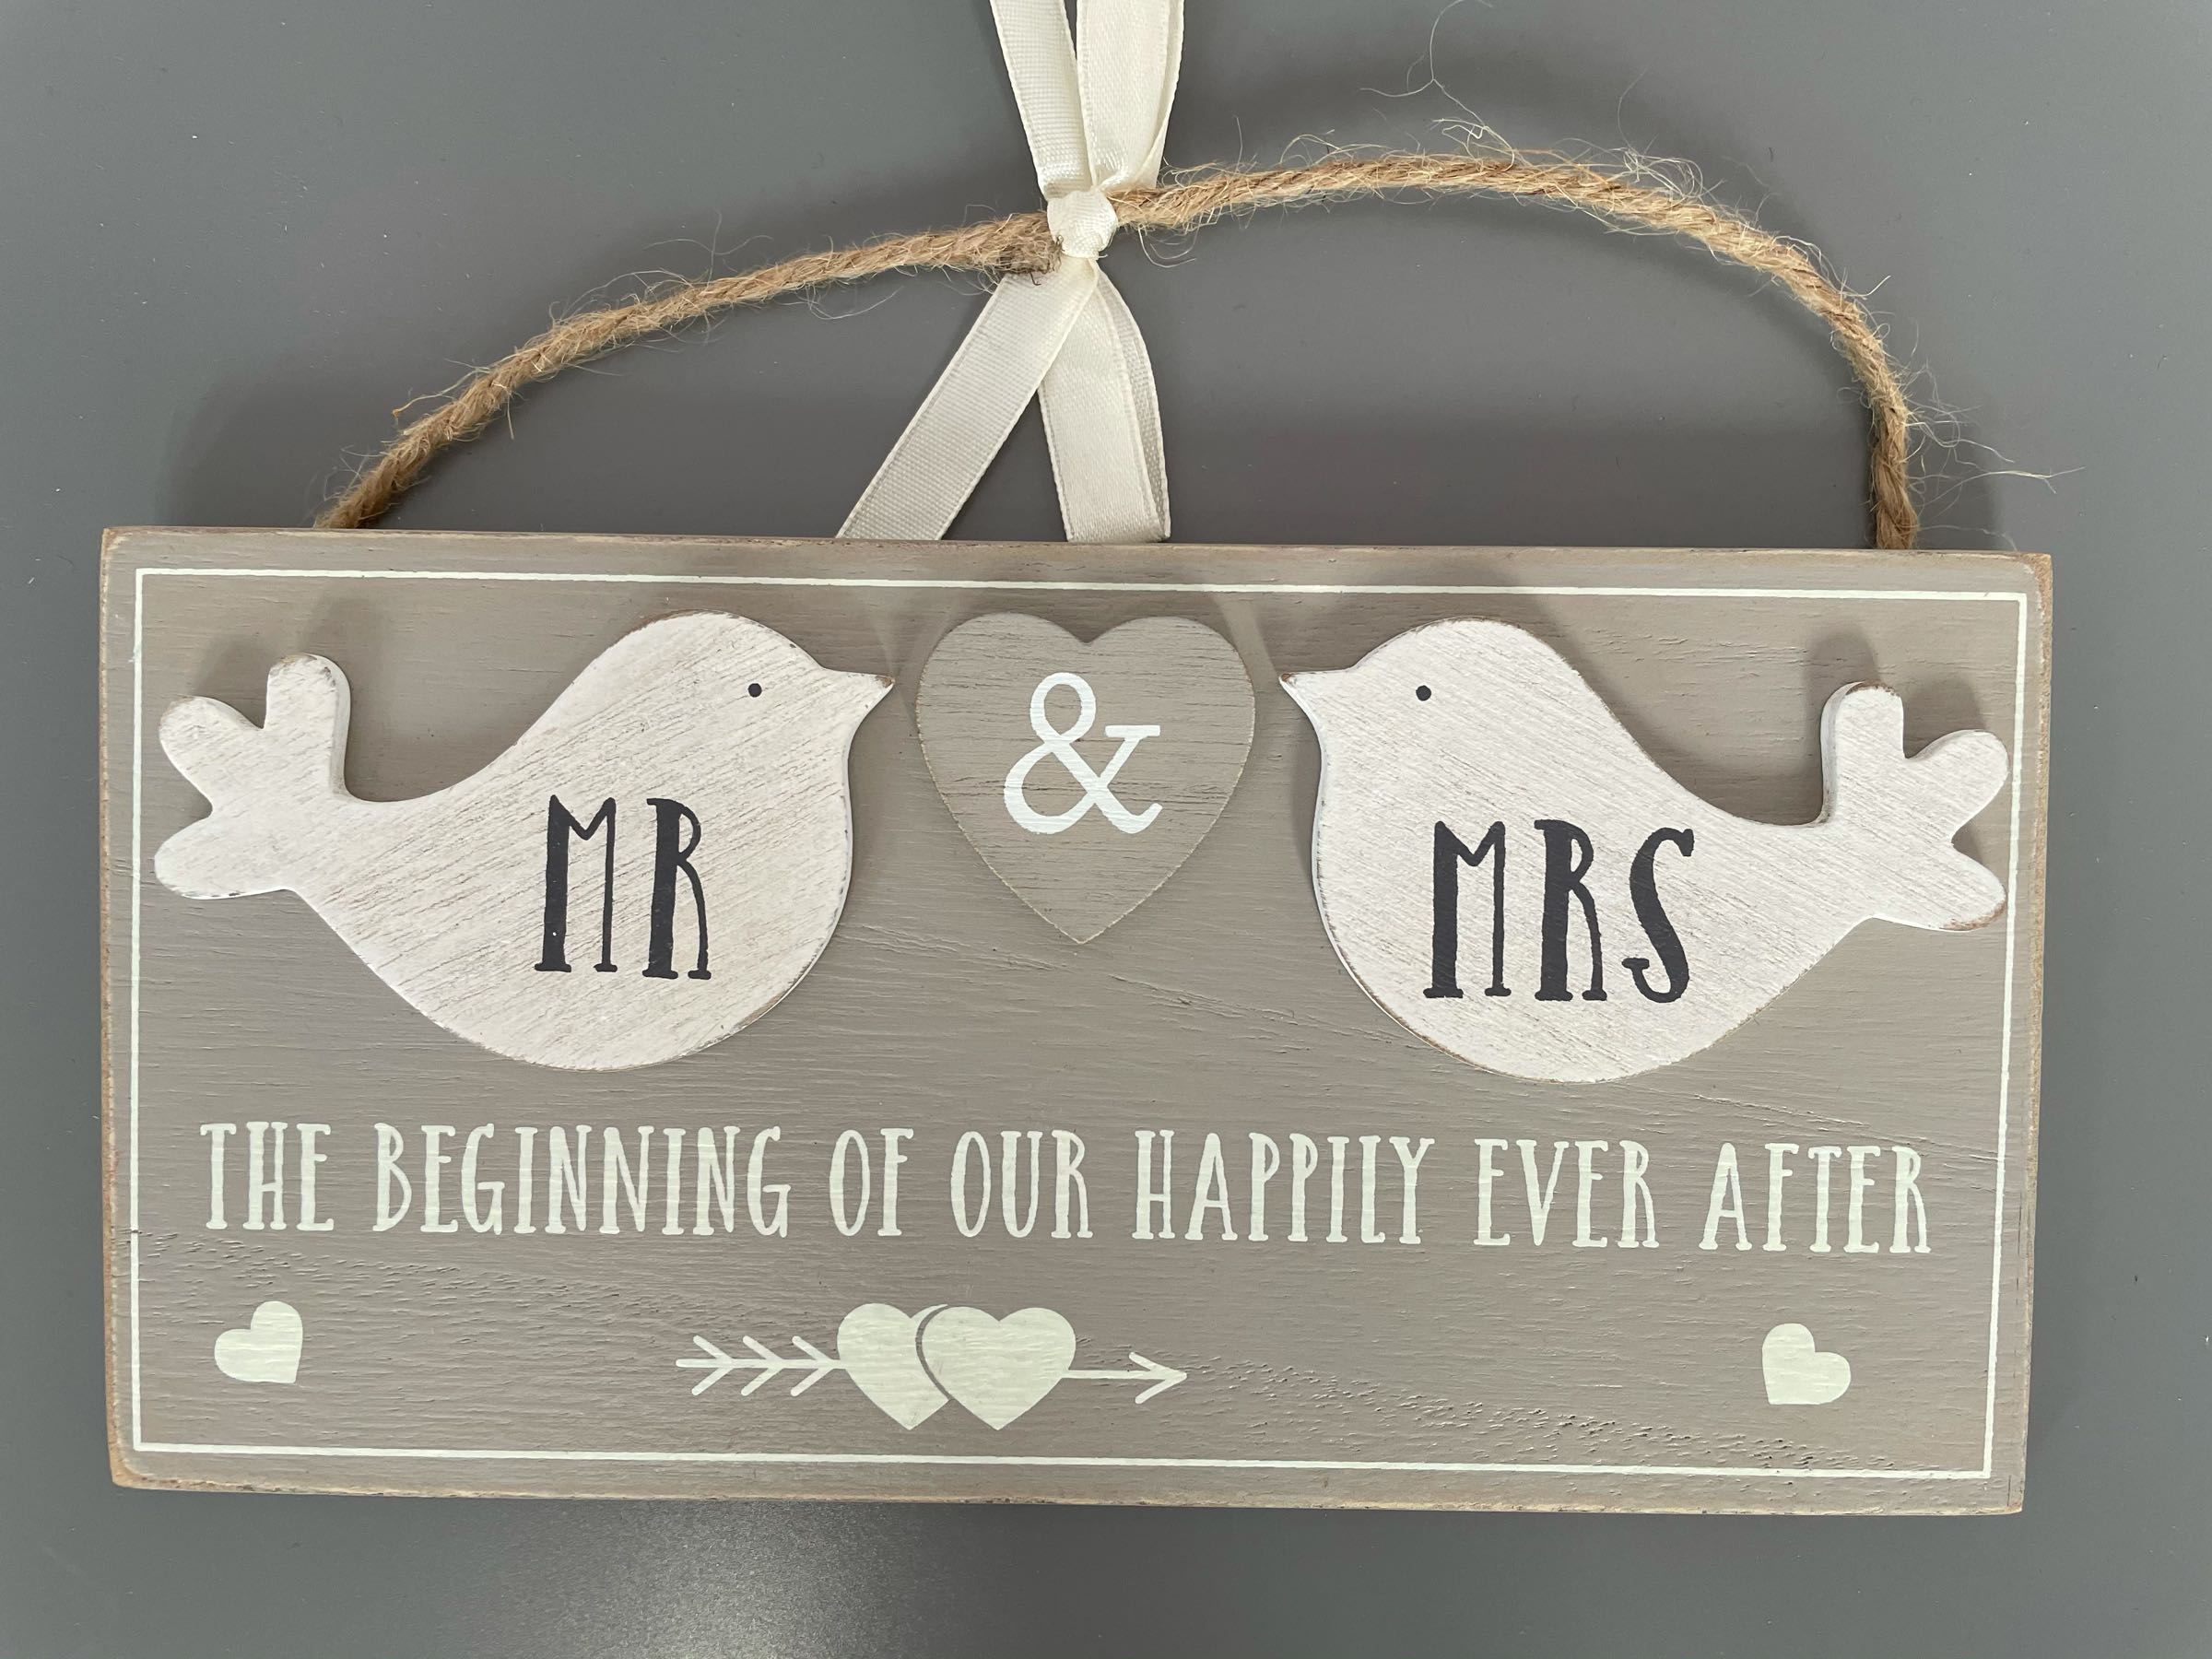 Mr and Mrs- the beginning of our happily ever after 